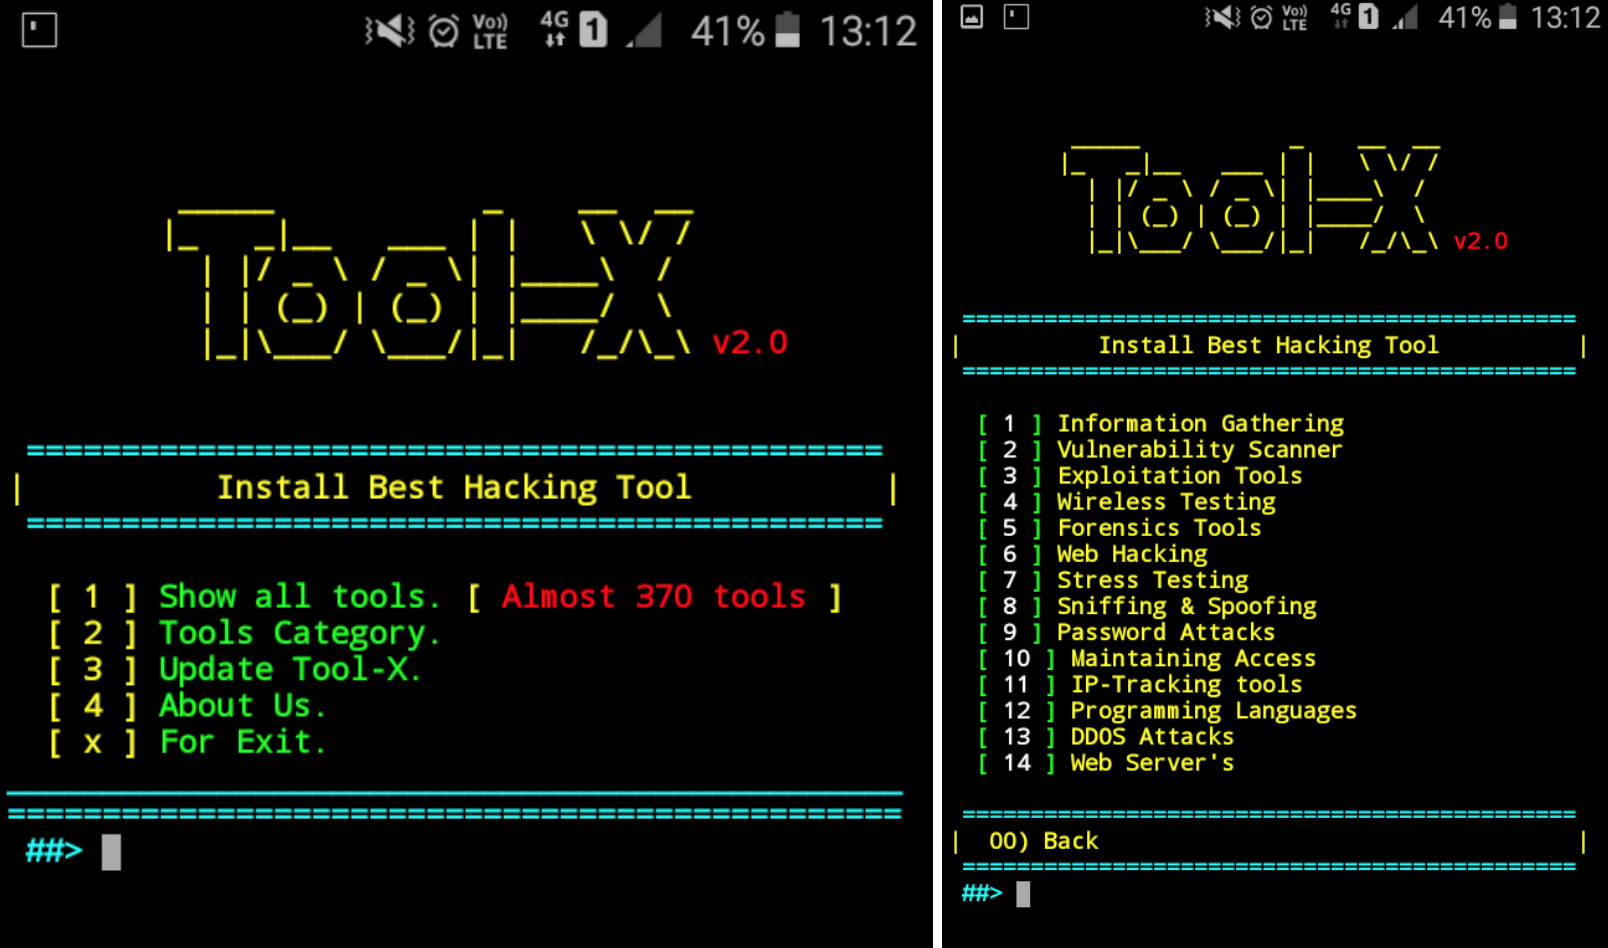 Tool-X is Kali Linux hacking tools installer for Termux and linux system